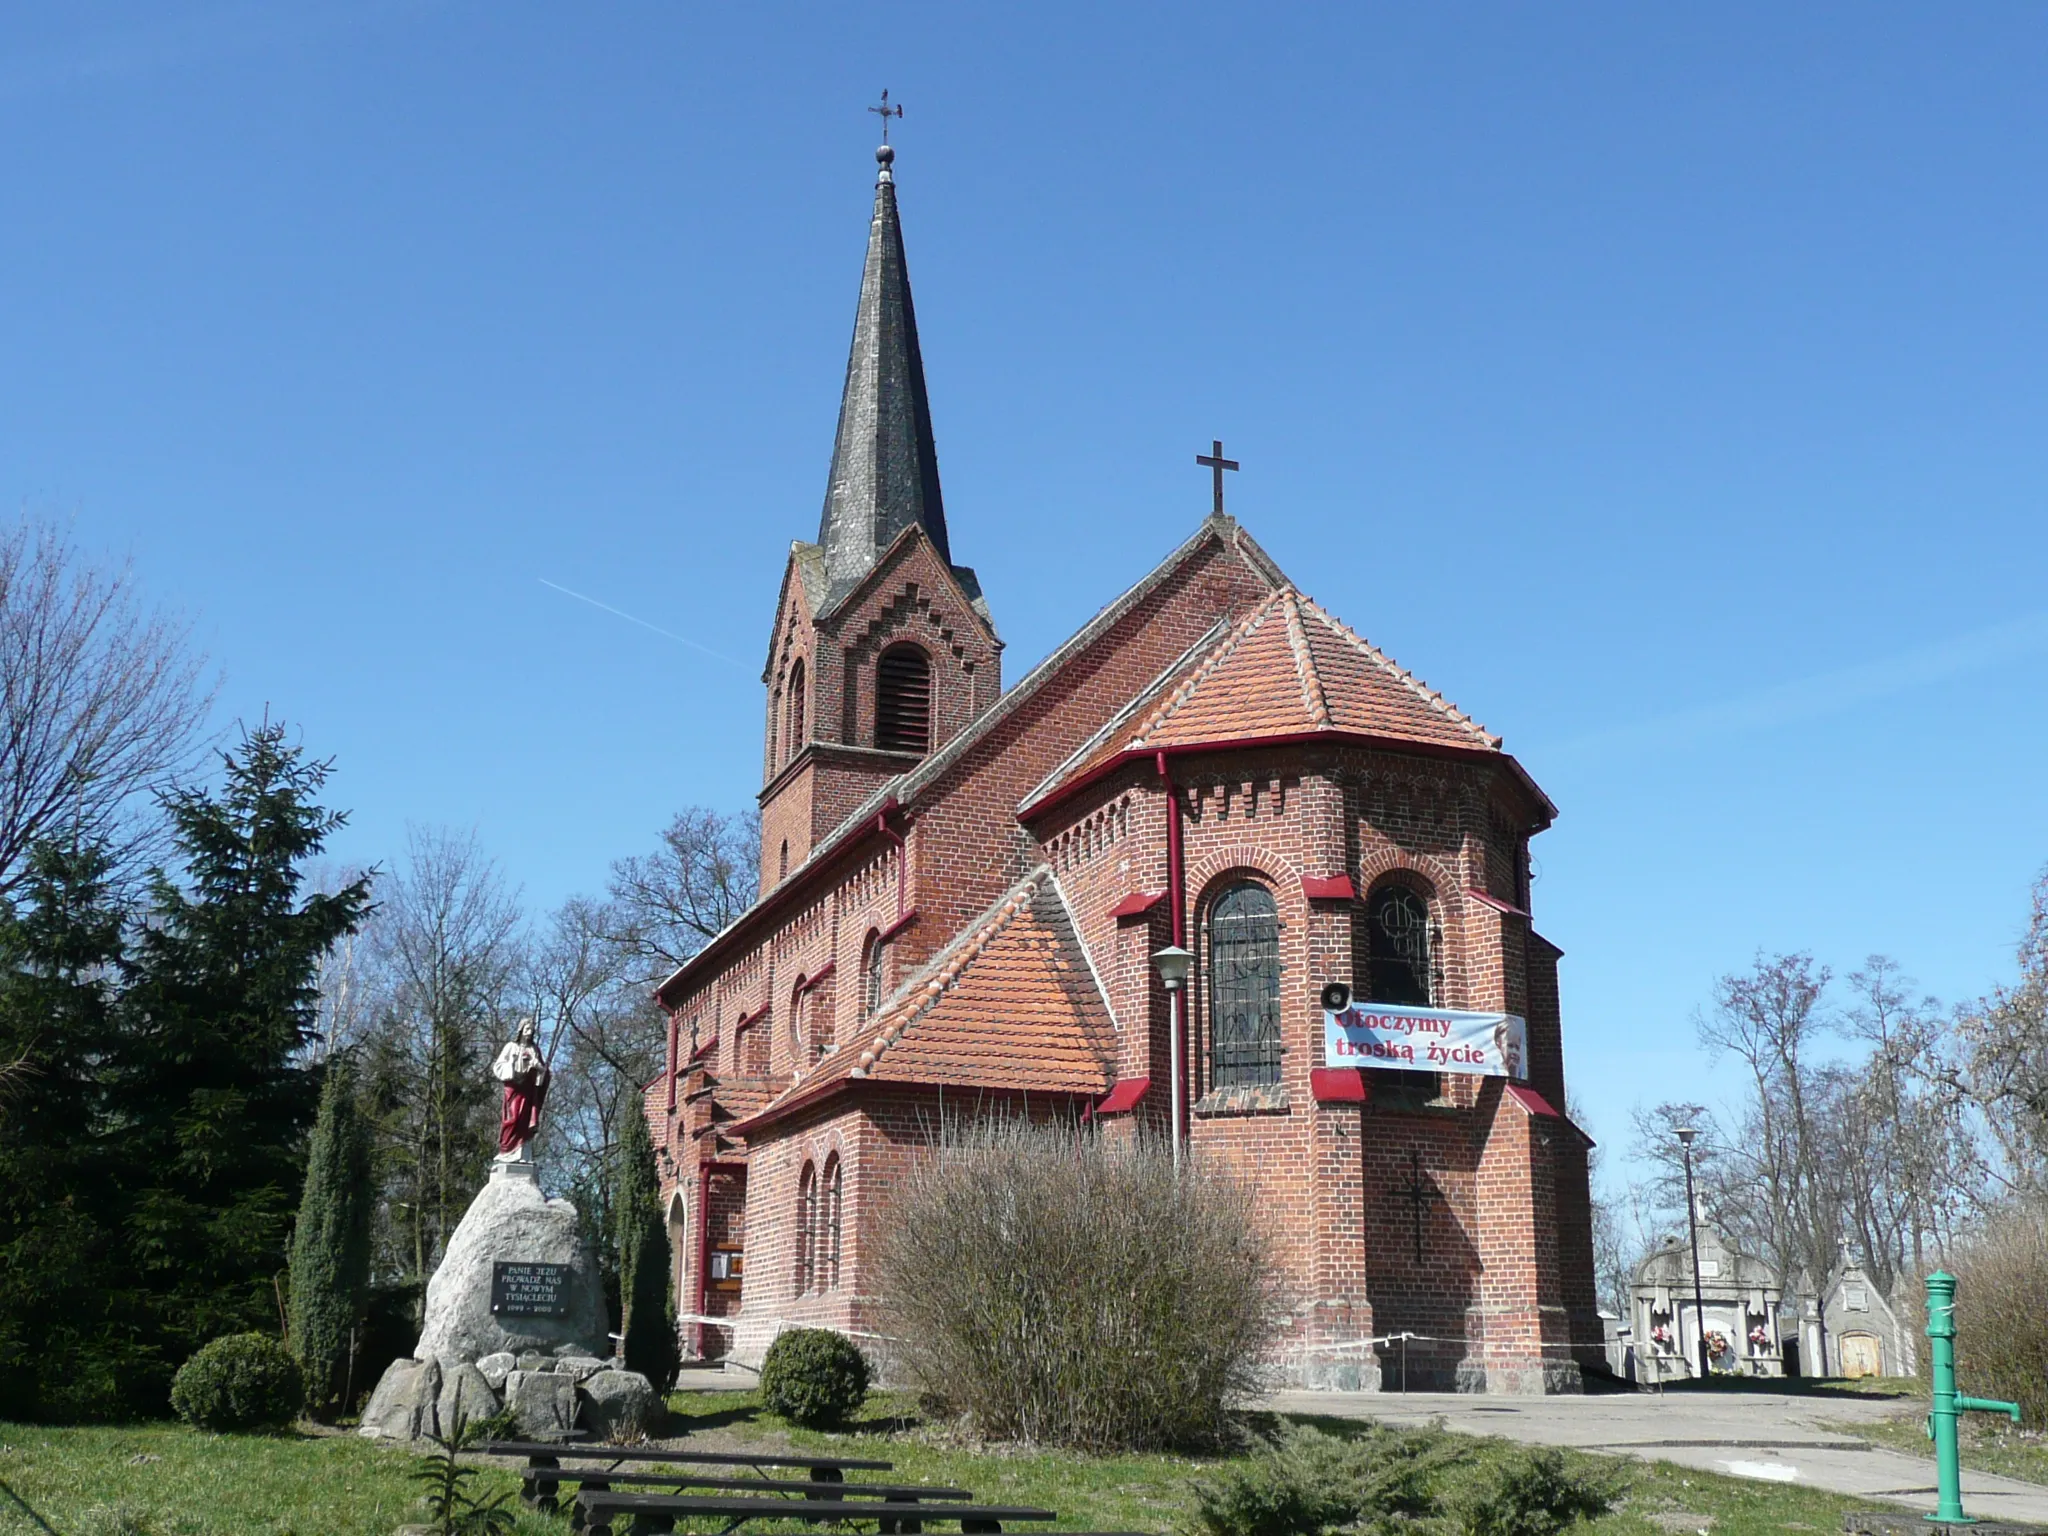 Photo showing: The church in Wenecja, Poland.